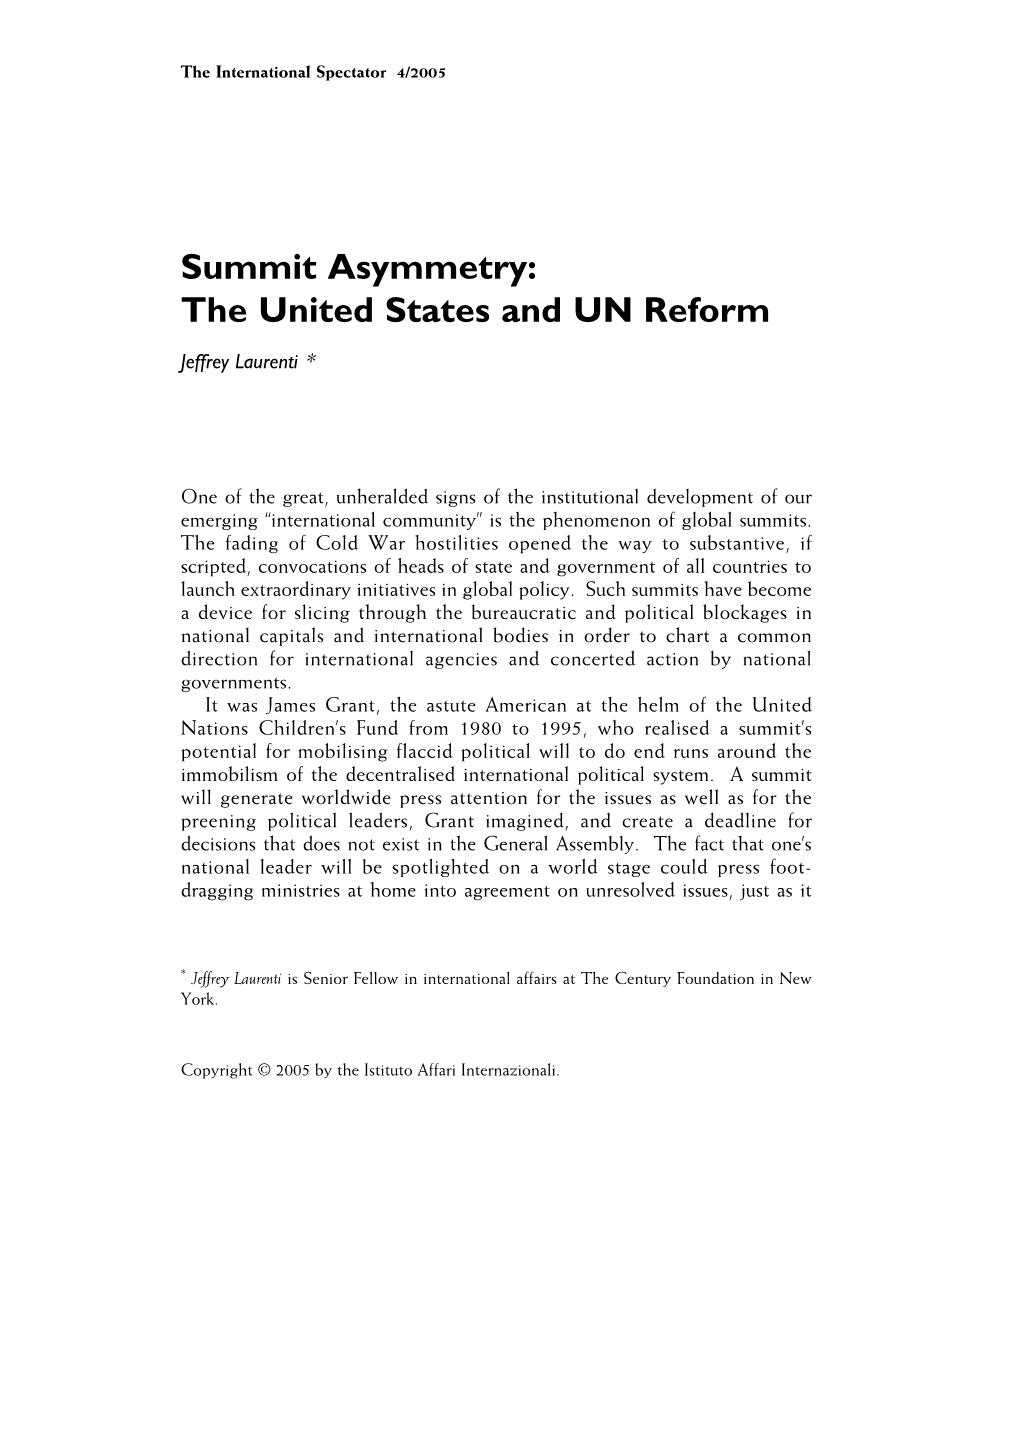 Summit Asymmetry: the United States and UN Reform